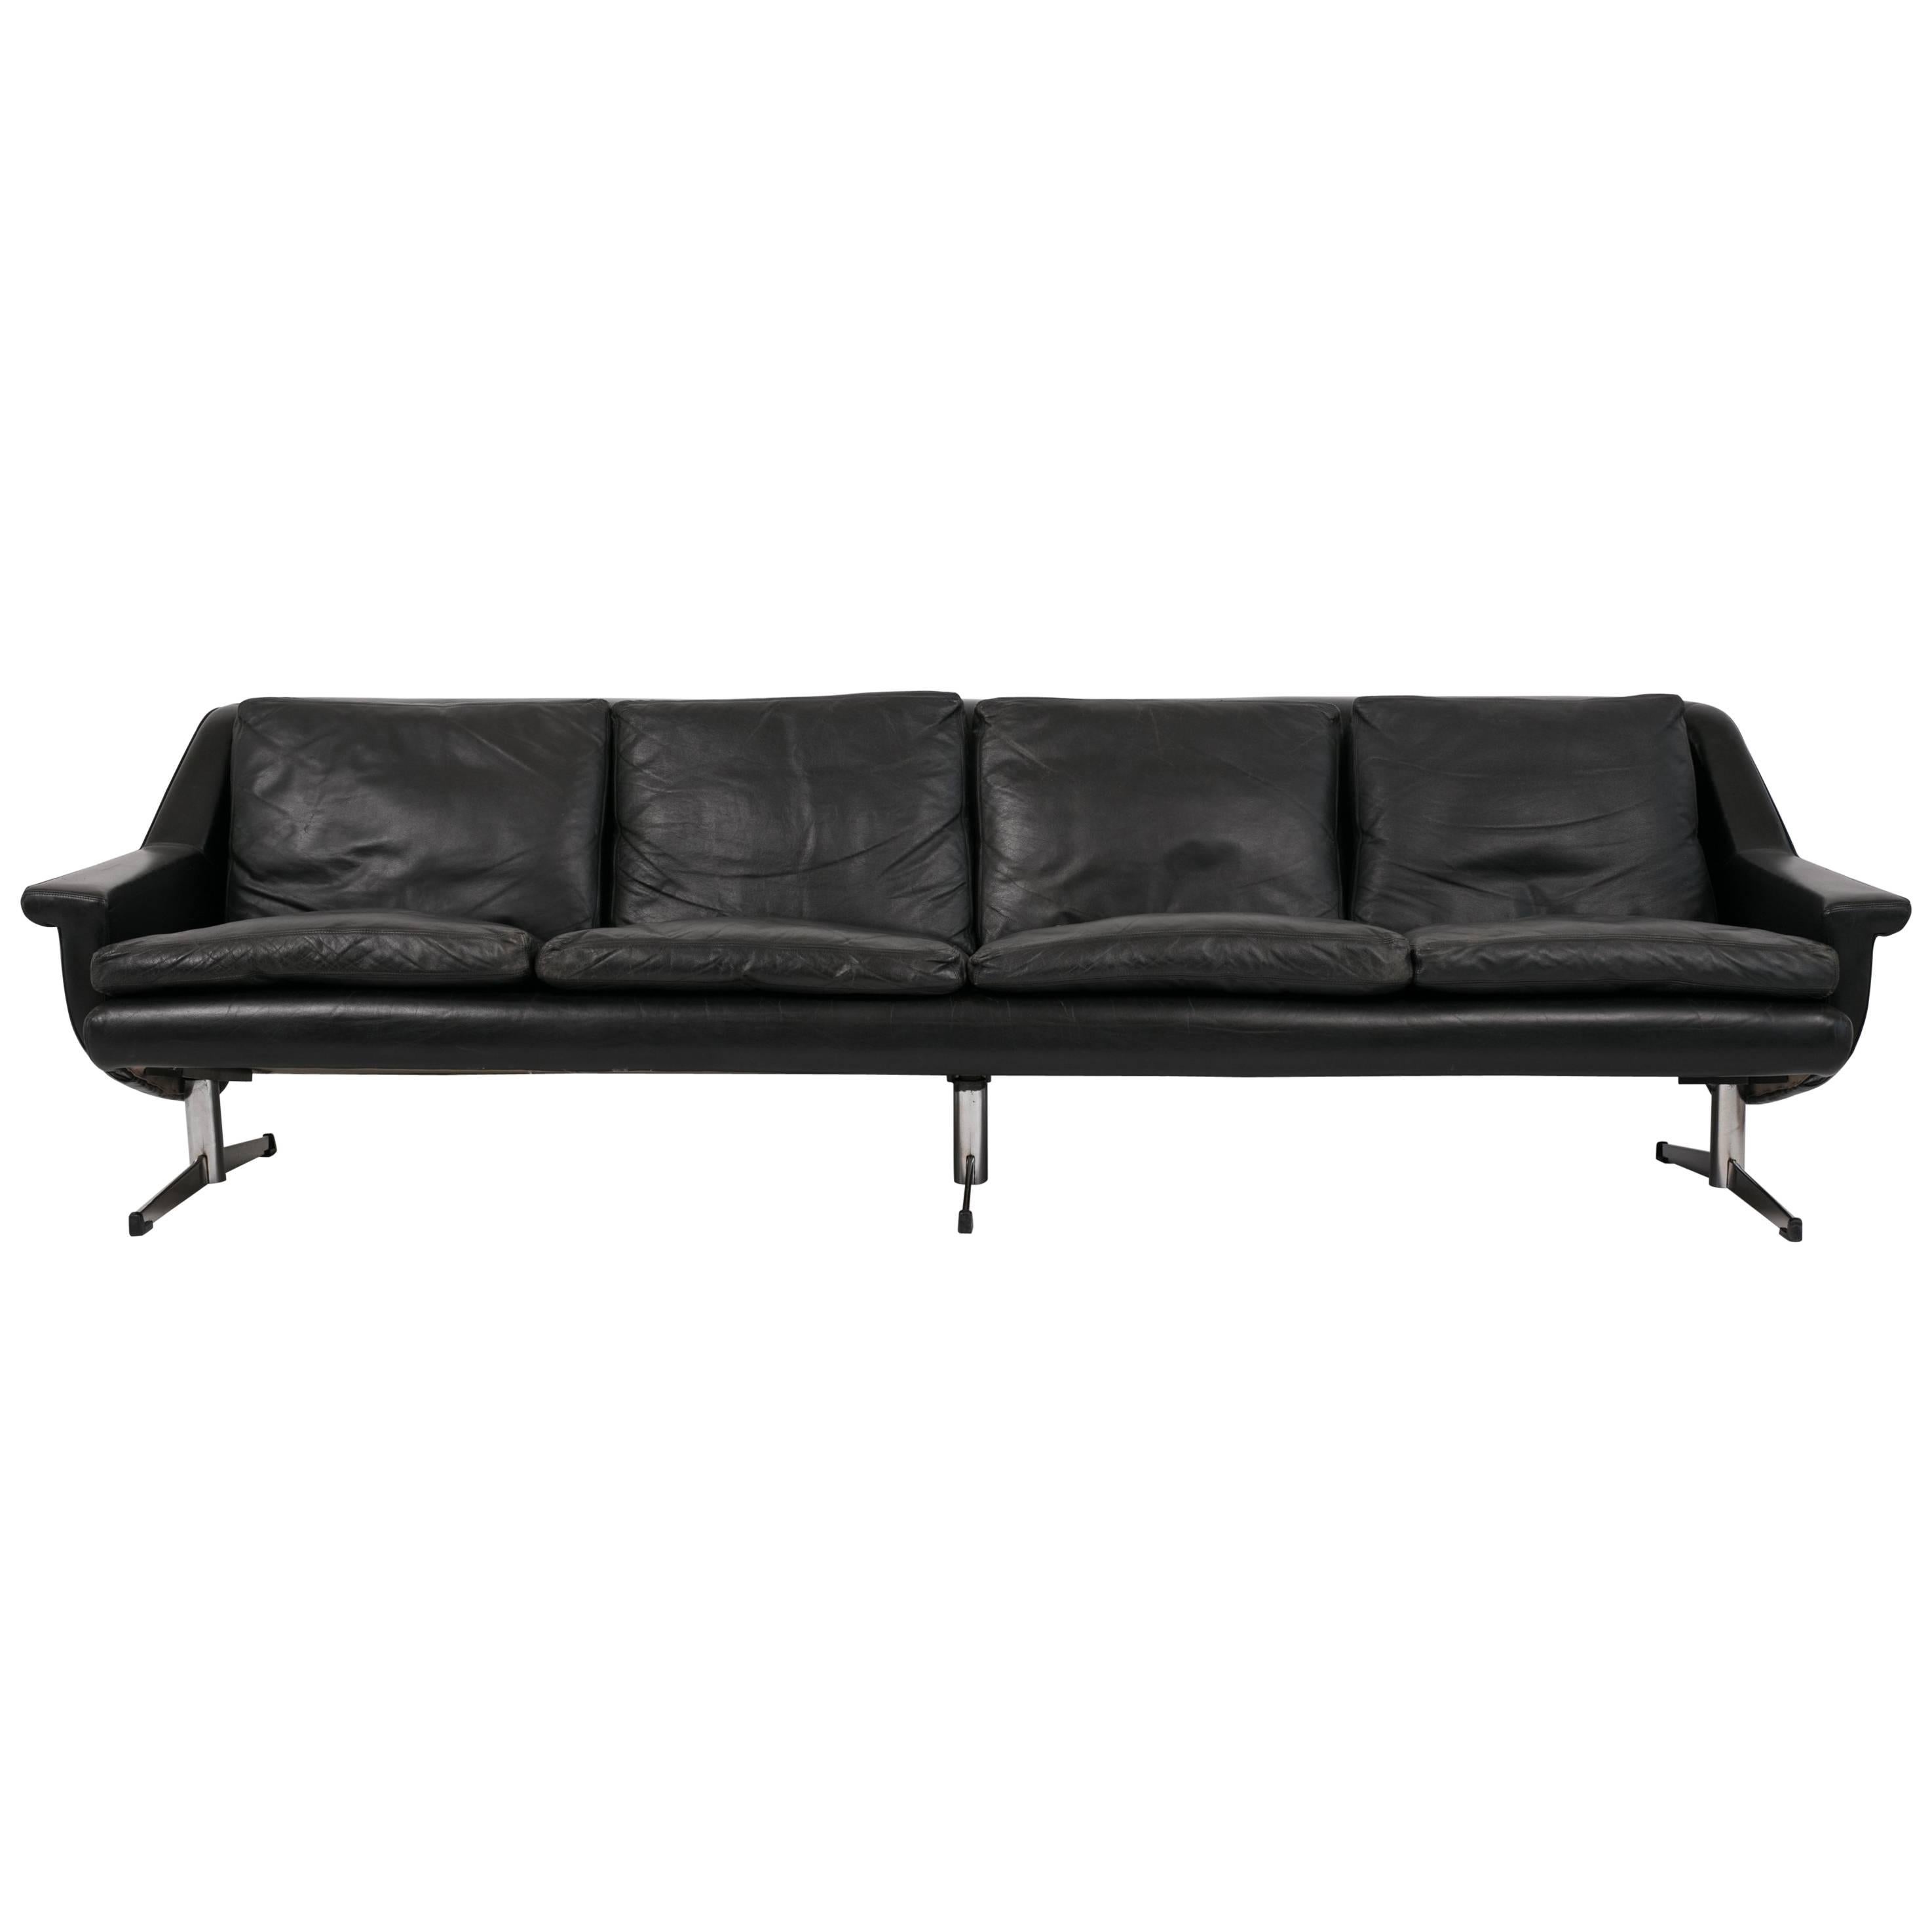 Four-Seat Leather Sofa by Georg Thams for Vejen Polstermøbelfabrik